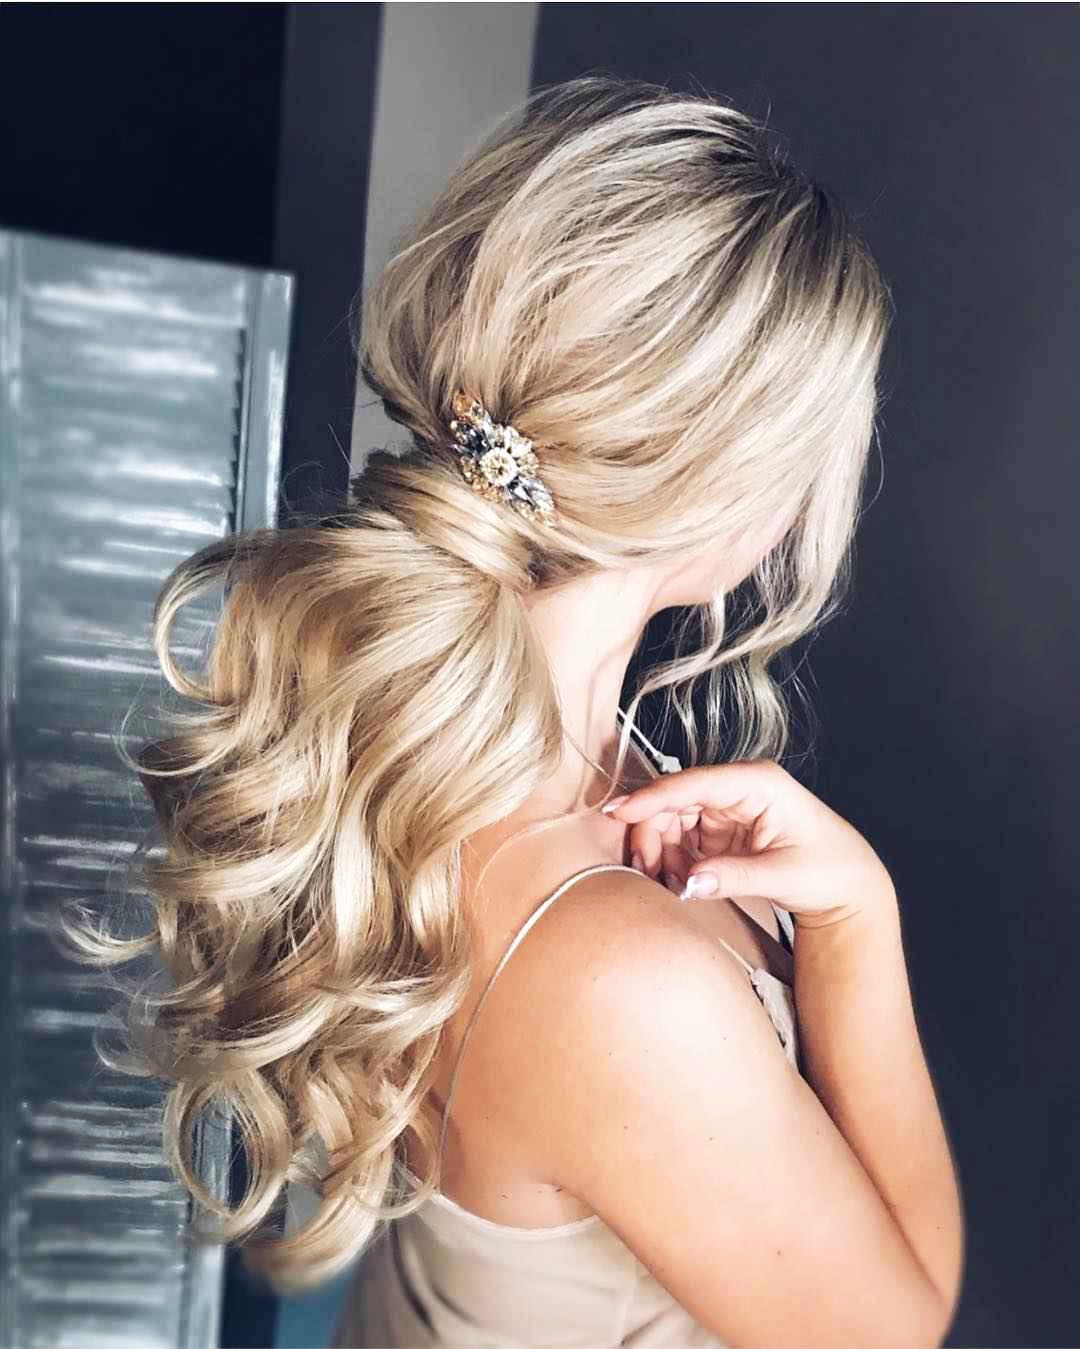 Hairstyles For Prom On Long Hair 2019-2020: Photo 18